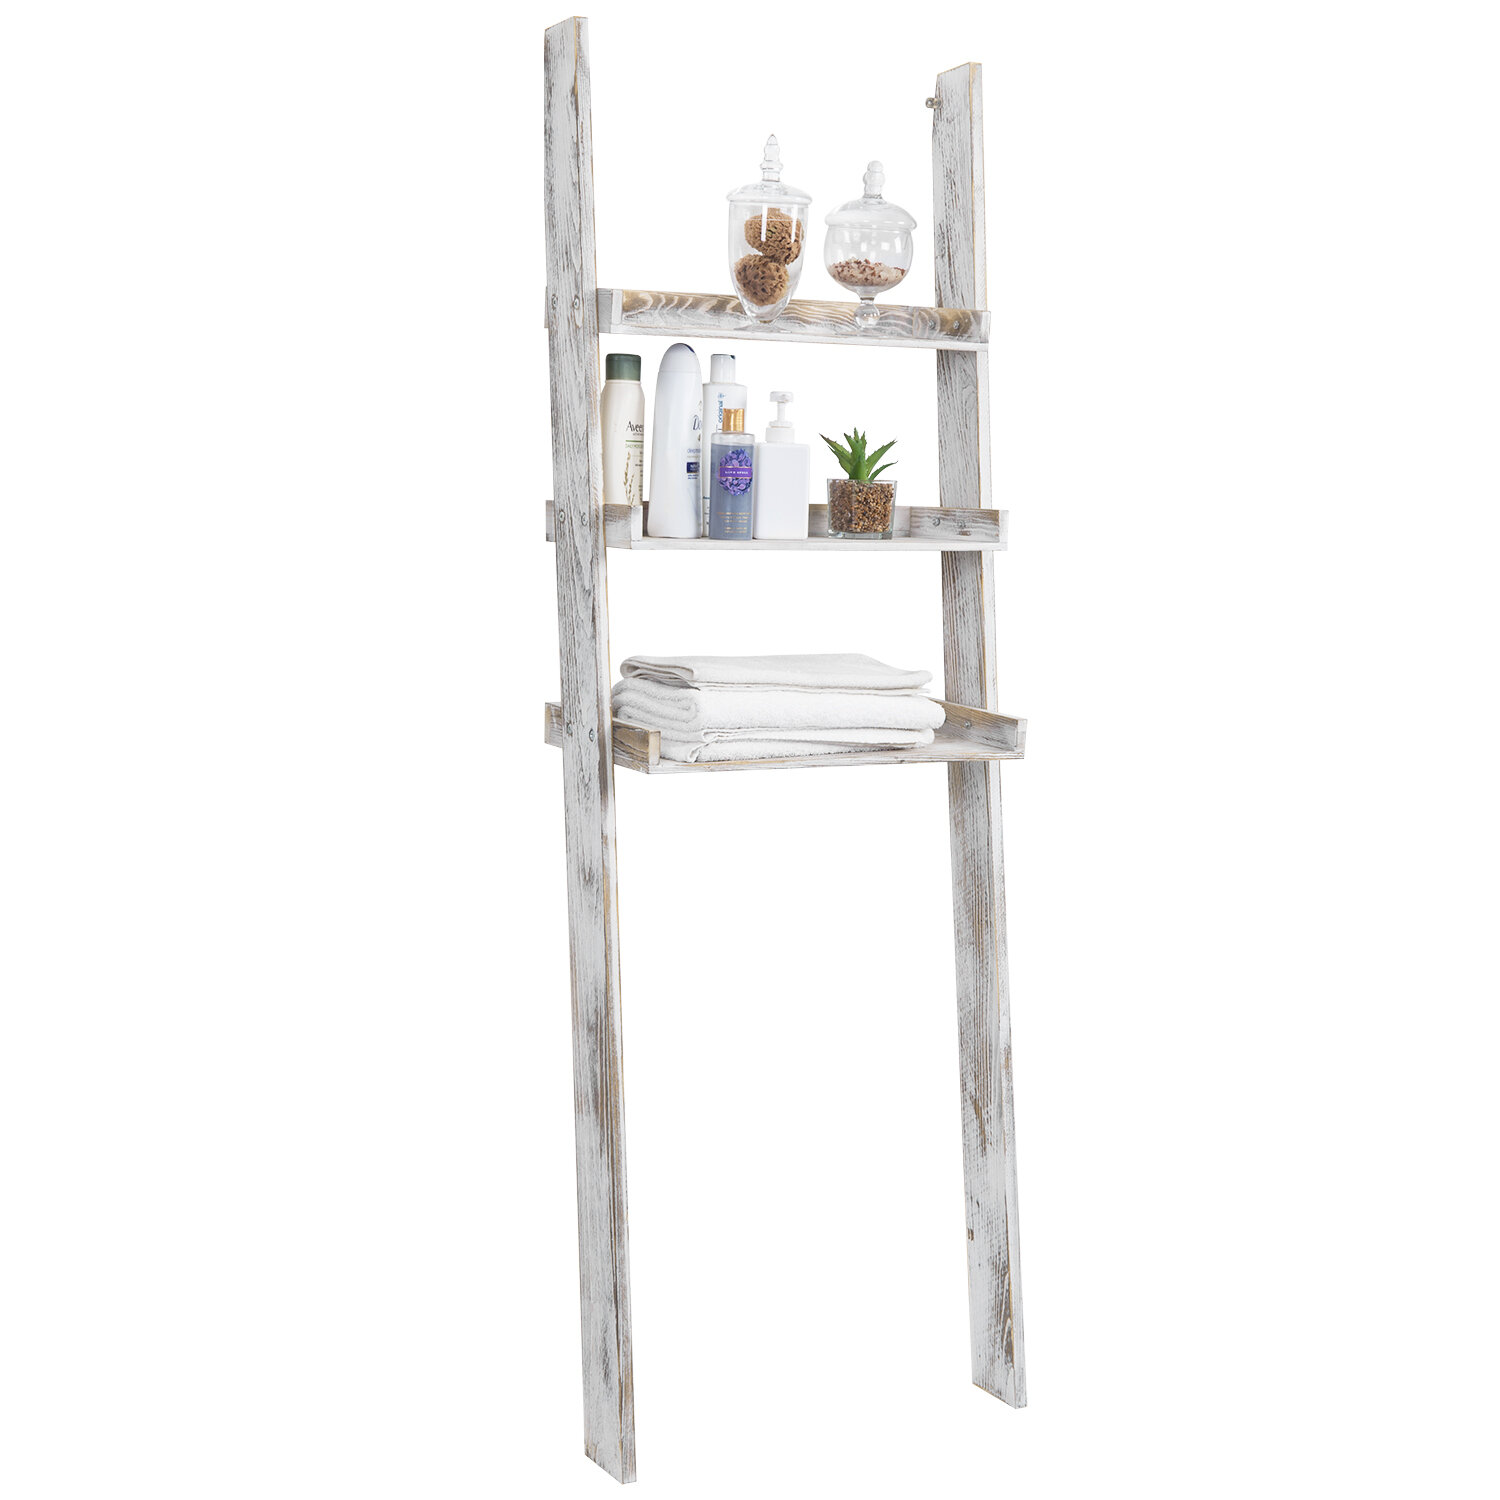 3-Tier Rustic Wood Over-the-Toilet Wall-Leaning Ladder Storage Shelves